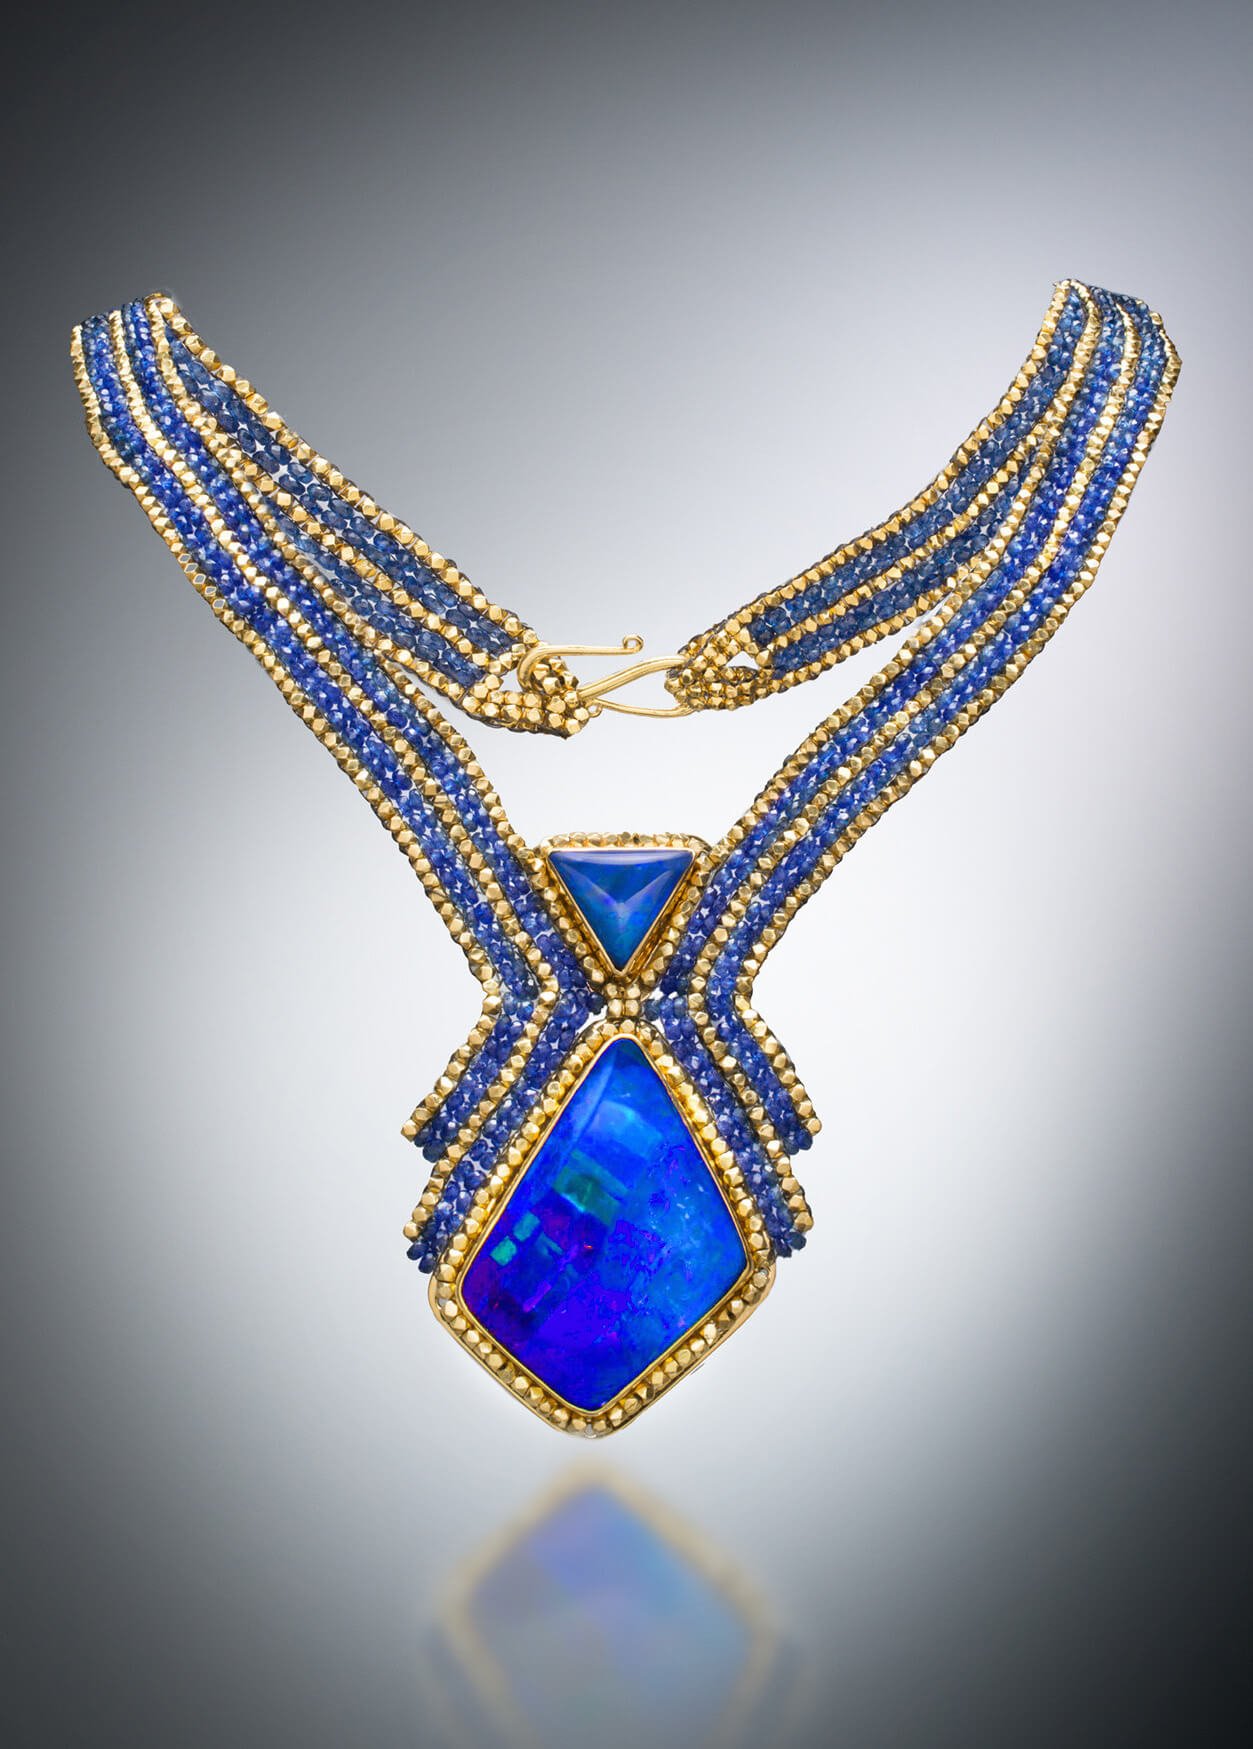 Opal and Sapphire Collar. This collar is hand woven of blue sapphire, and 18k gold beads. The two blue Australian boulder opals are set in hand fabricated 18k gold bezels.